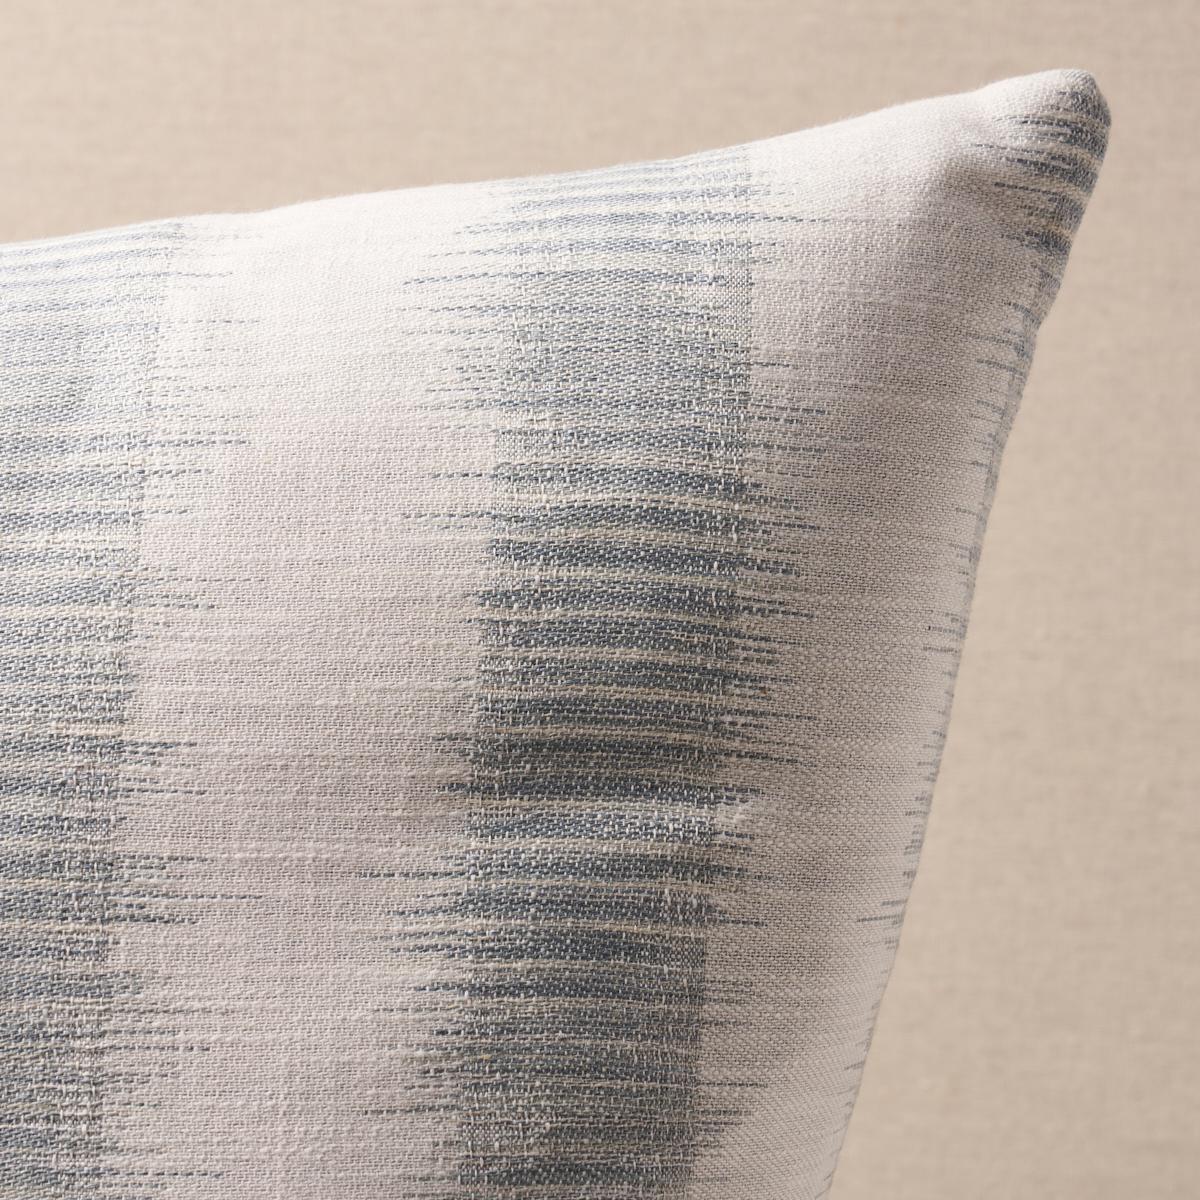 This pillow features Attleboro Ikat with a knife edge finish. Attleboro Ikat is a woven, irregular stripe made of twisted cotton and linen yarns. Pillow includes a feather/down fill insert and hidden zip closure.
  